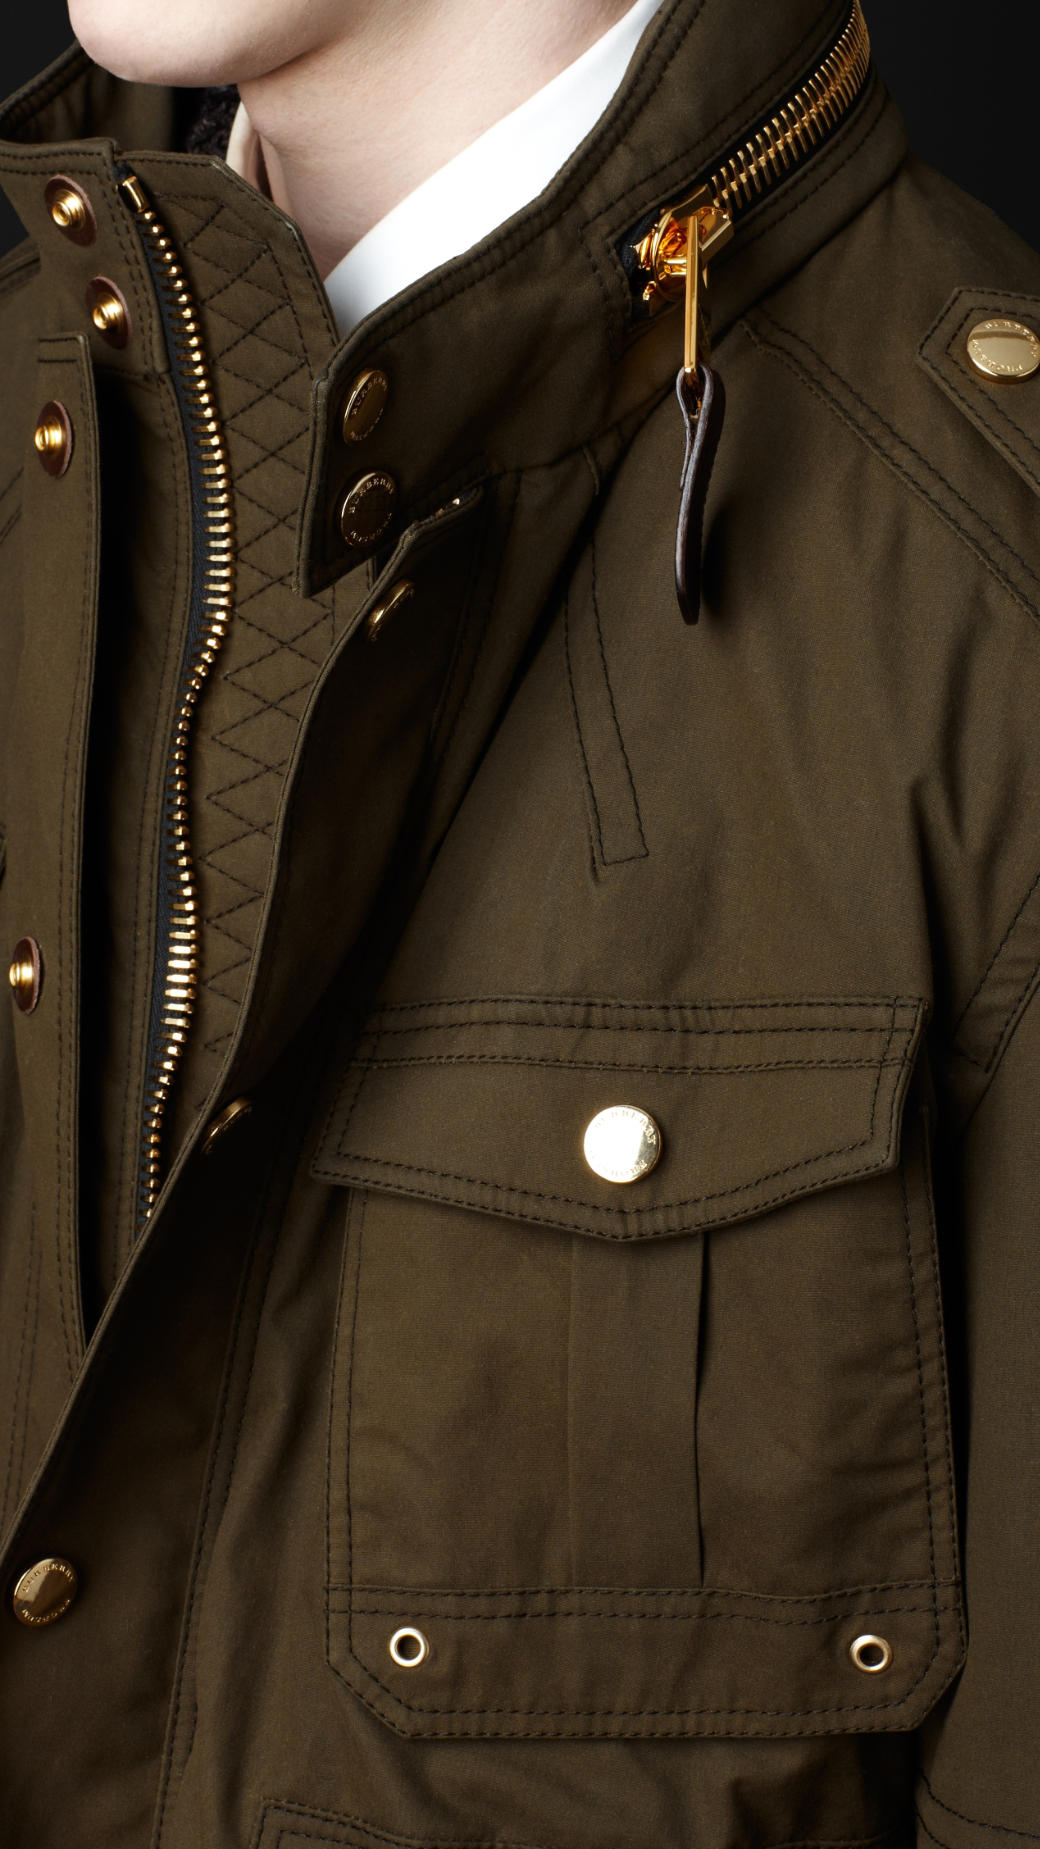 Burberry Prorsum Waxed Cotton Field Jacket in Brown for Men - Lyst